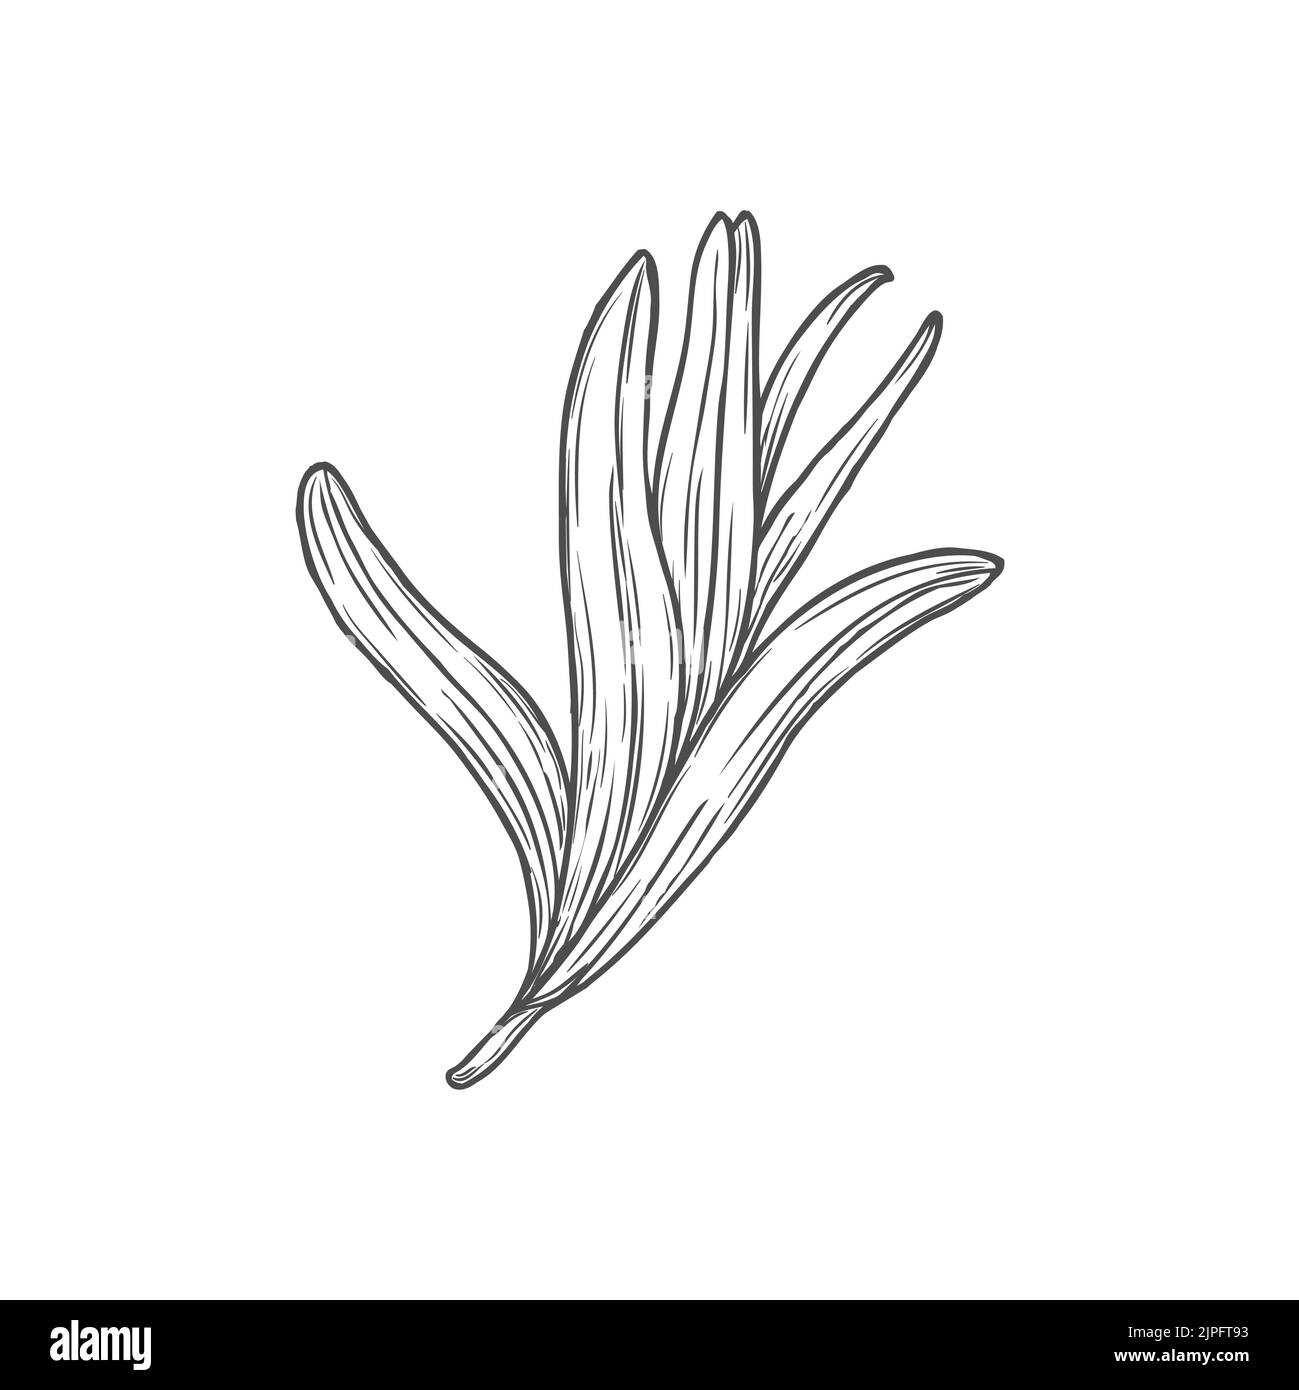 Estragon or tarragon culinary condiment isolated monochrome sketch icon. Vector artemisia dracunculus, essential perennial aromanic leaves. Cooking herb, food condiment, kitchen or medical greens Stock Vector